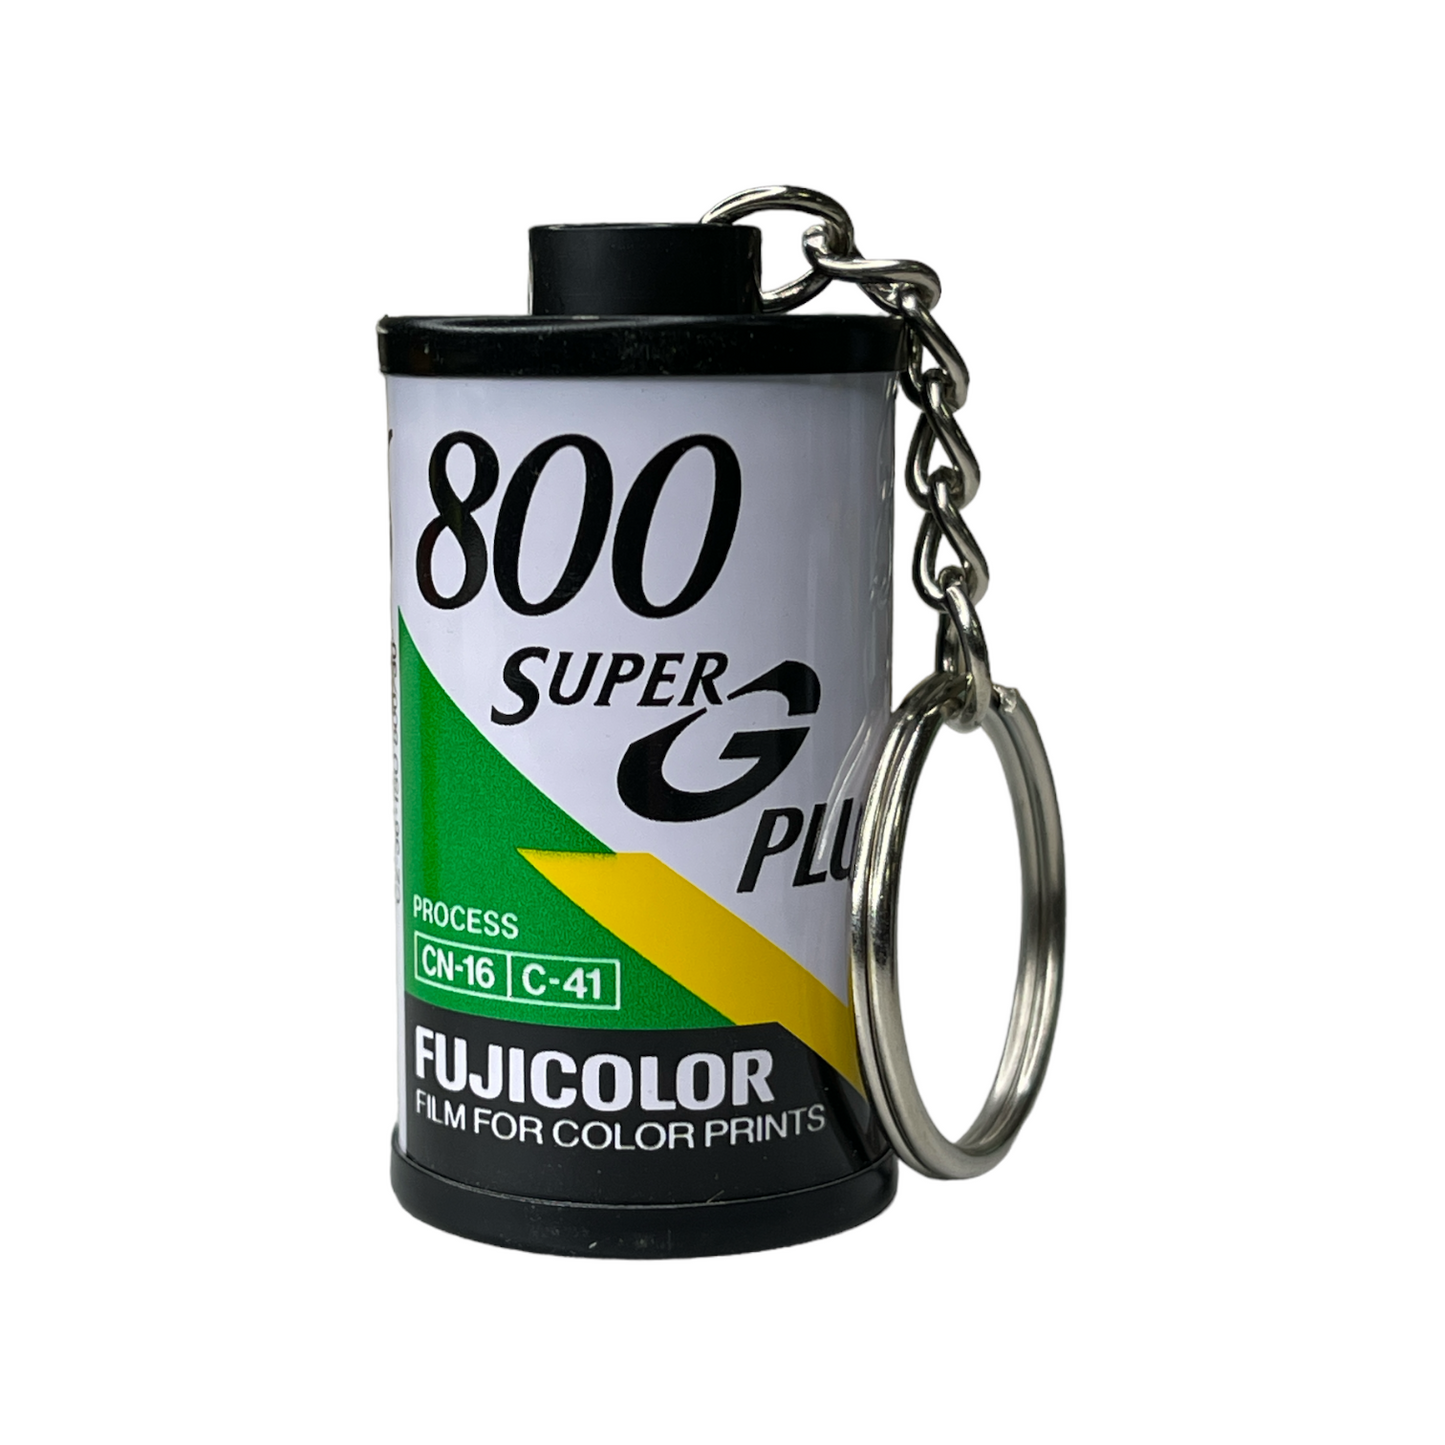 35mm Film Canister Keychain